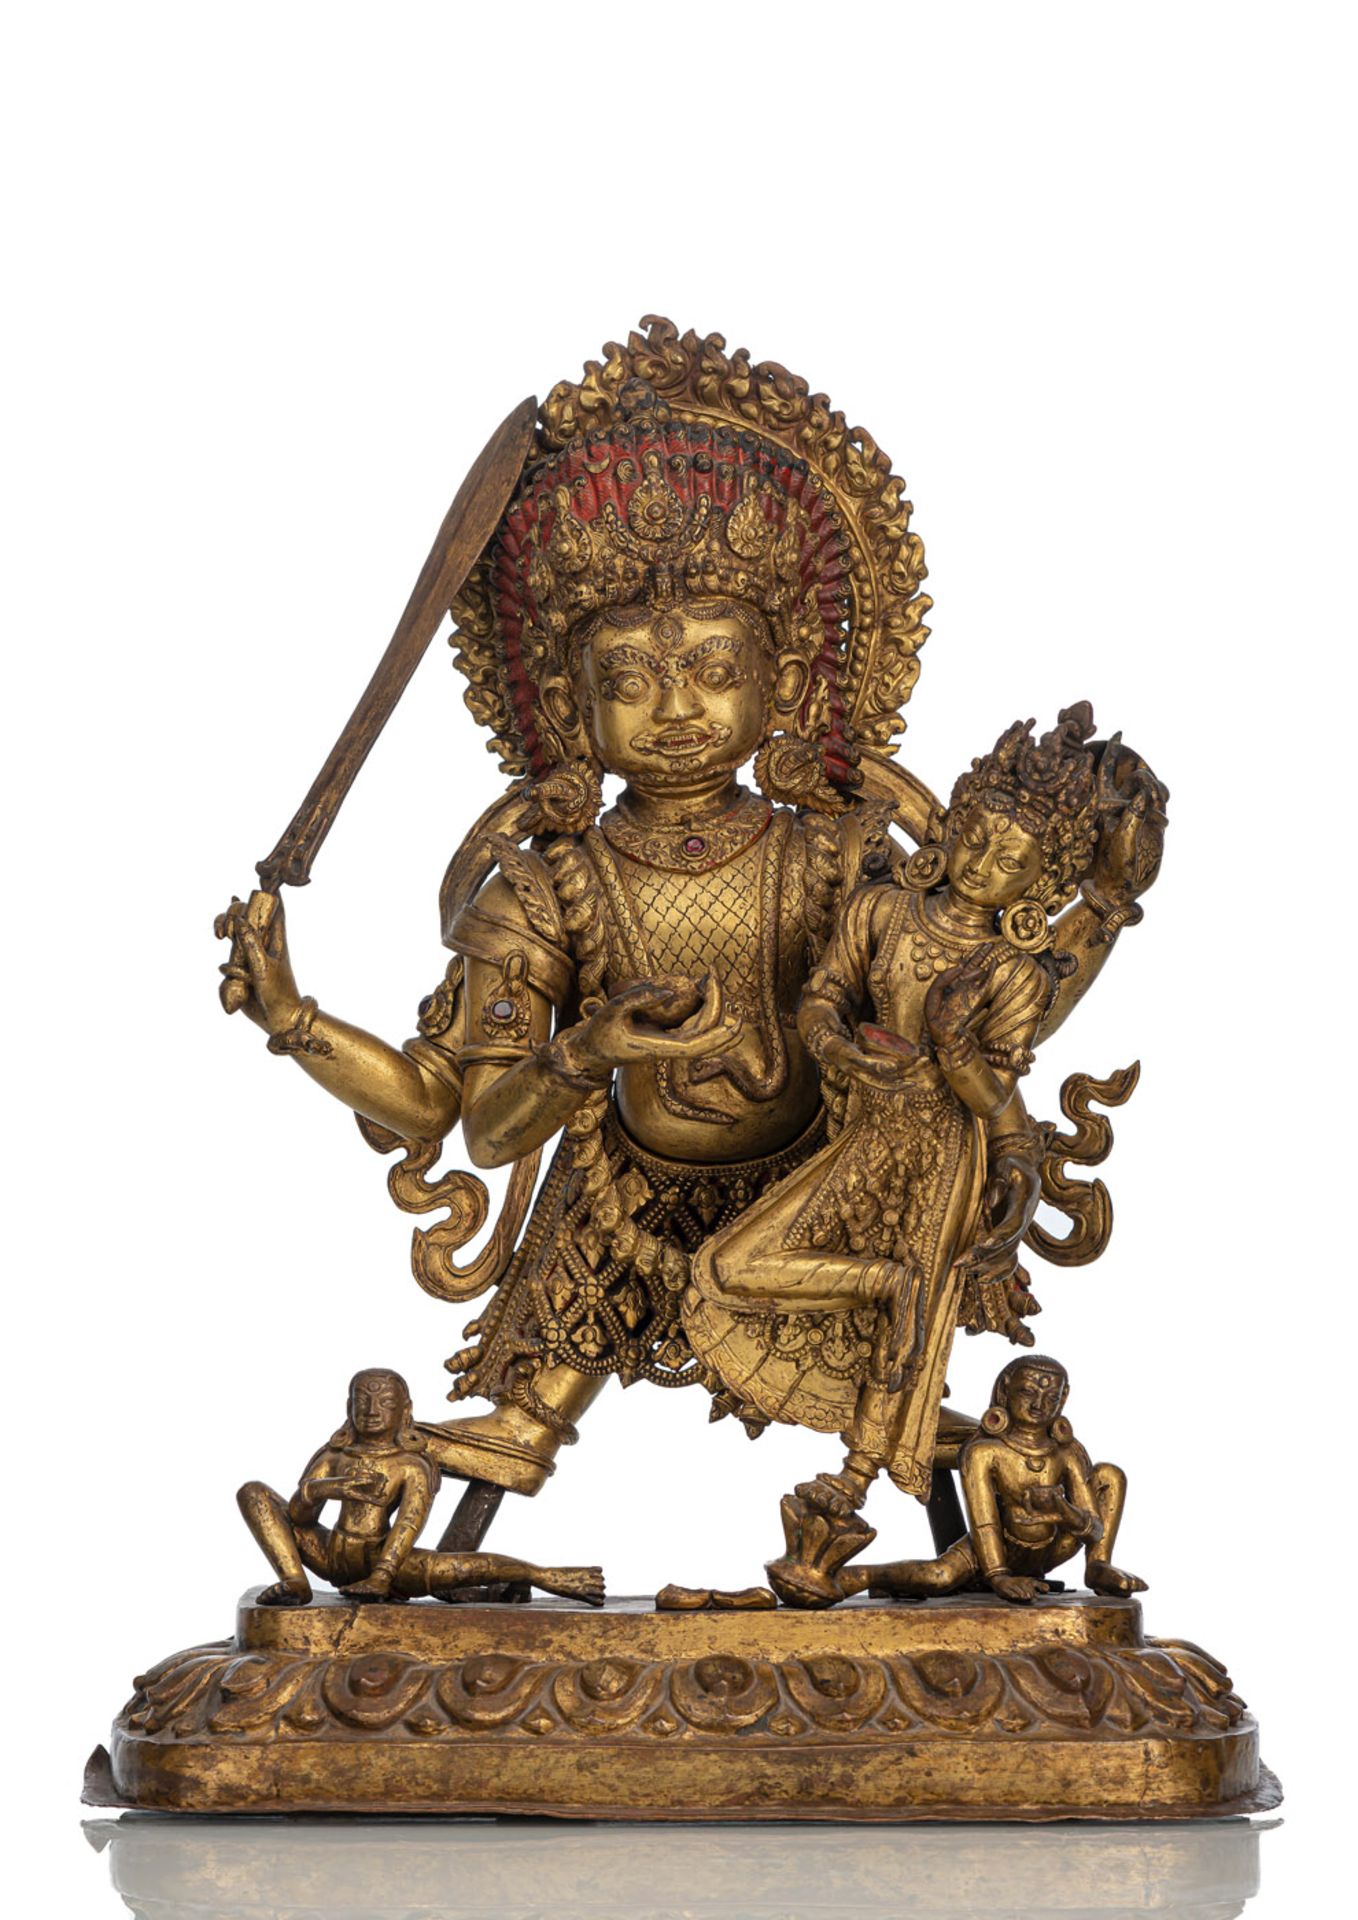 A LARGE AND MASSIVE GILT-BRONZE GROUP OF BHAIRAVA